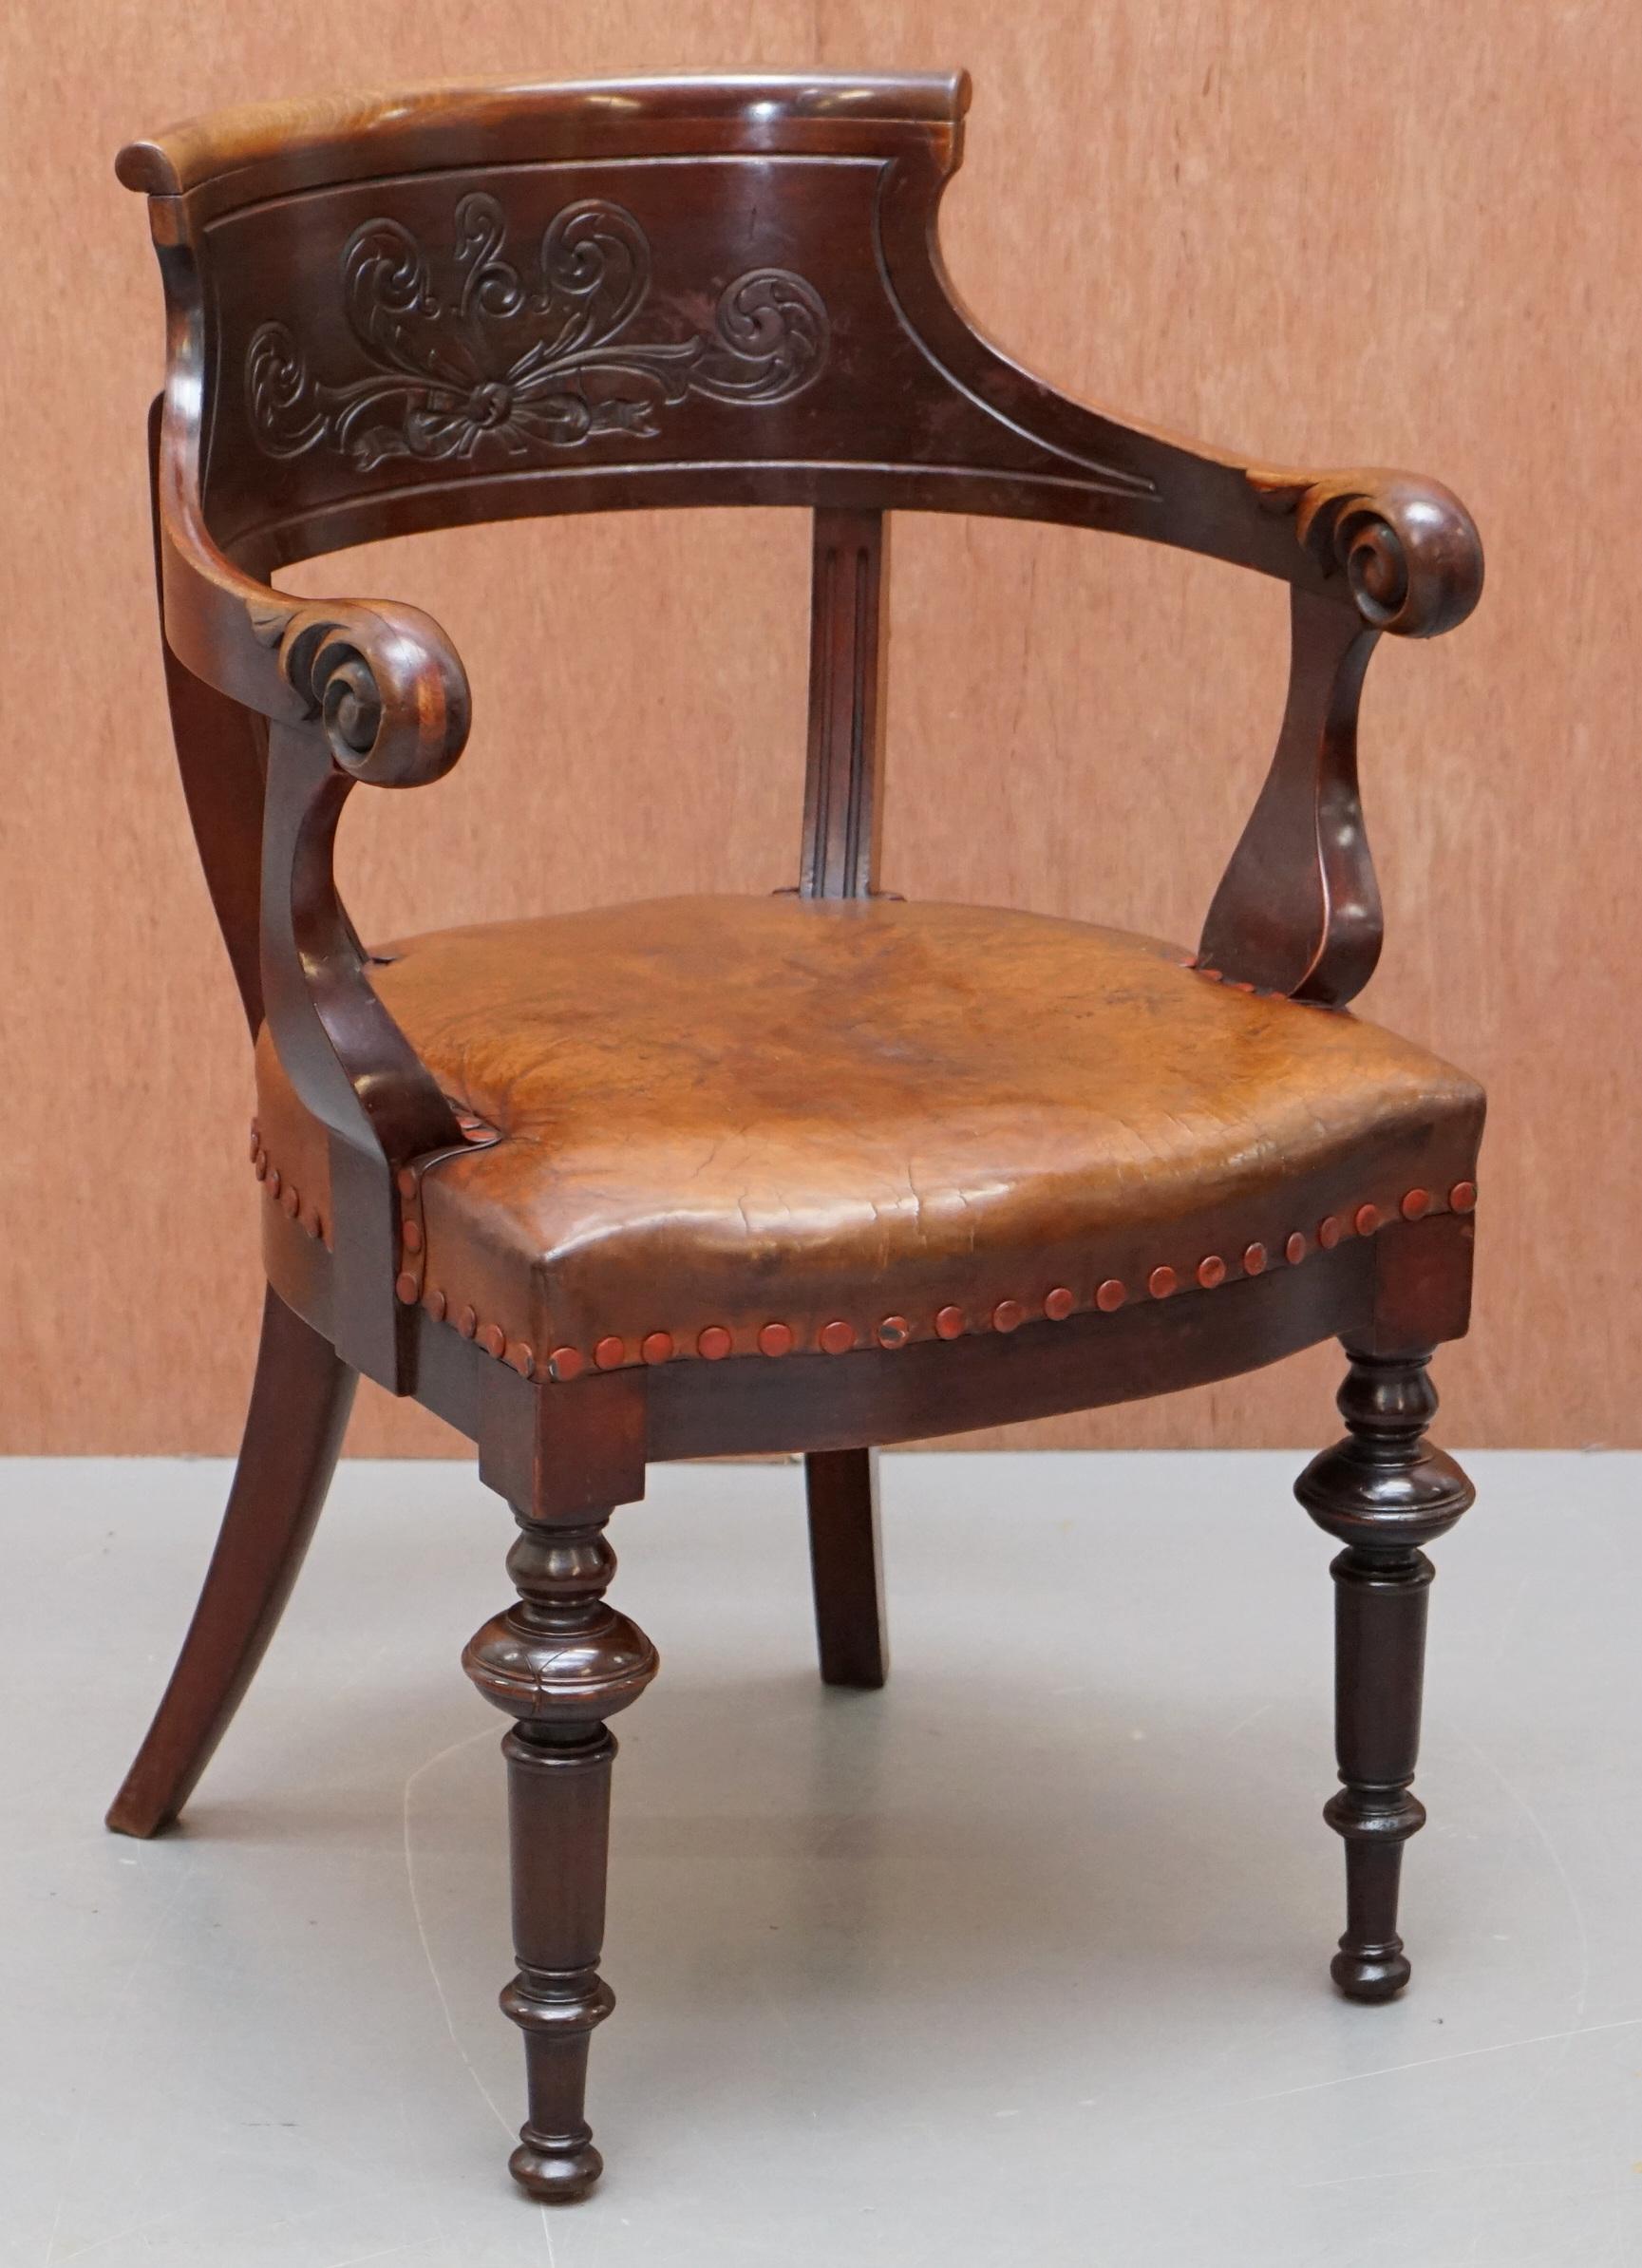 We are delighted to this lovely original circa 1840 handmade in England, mahogany with brown leather upholstery captain’s office chair.

A very good looking well-made and decorative office, library or study armchair. Made in solid mahogany,